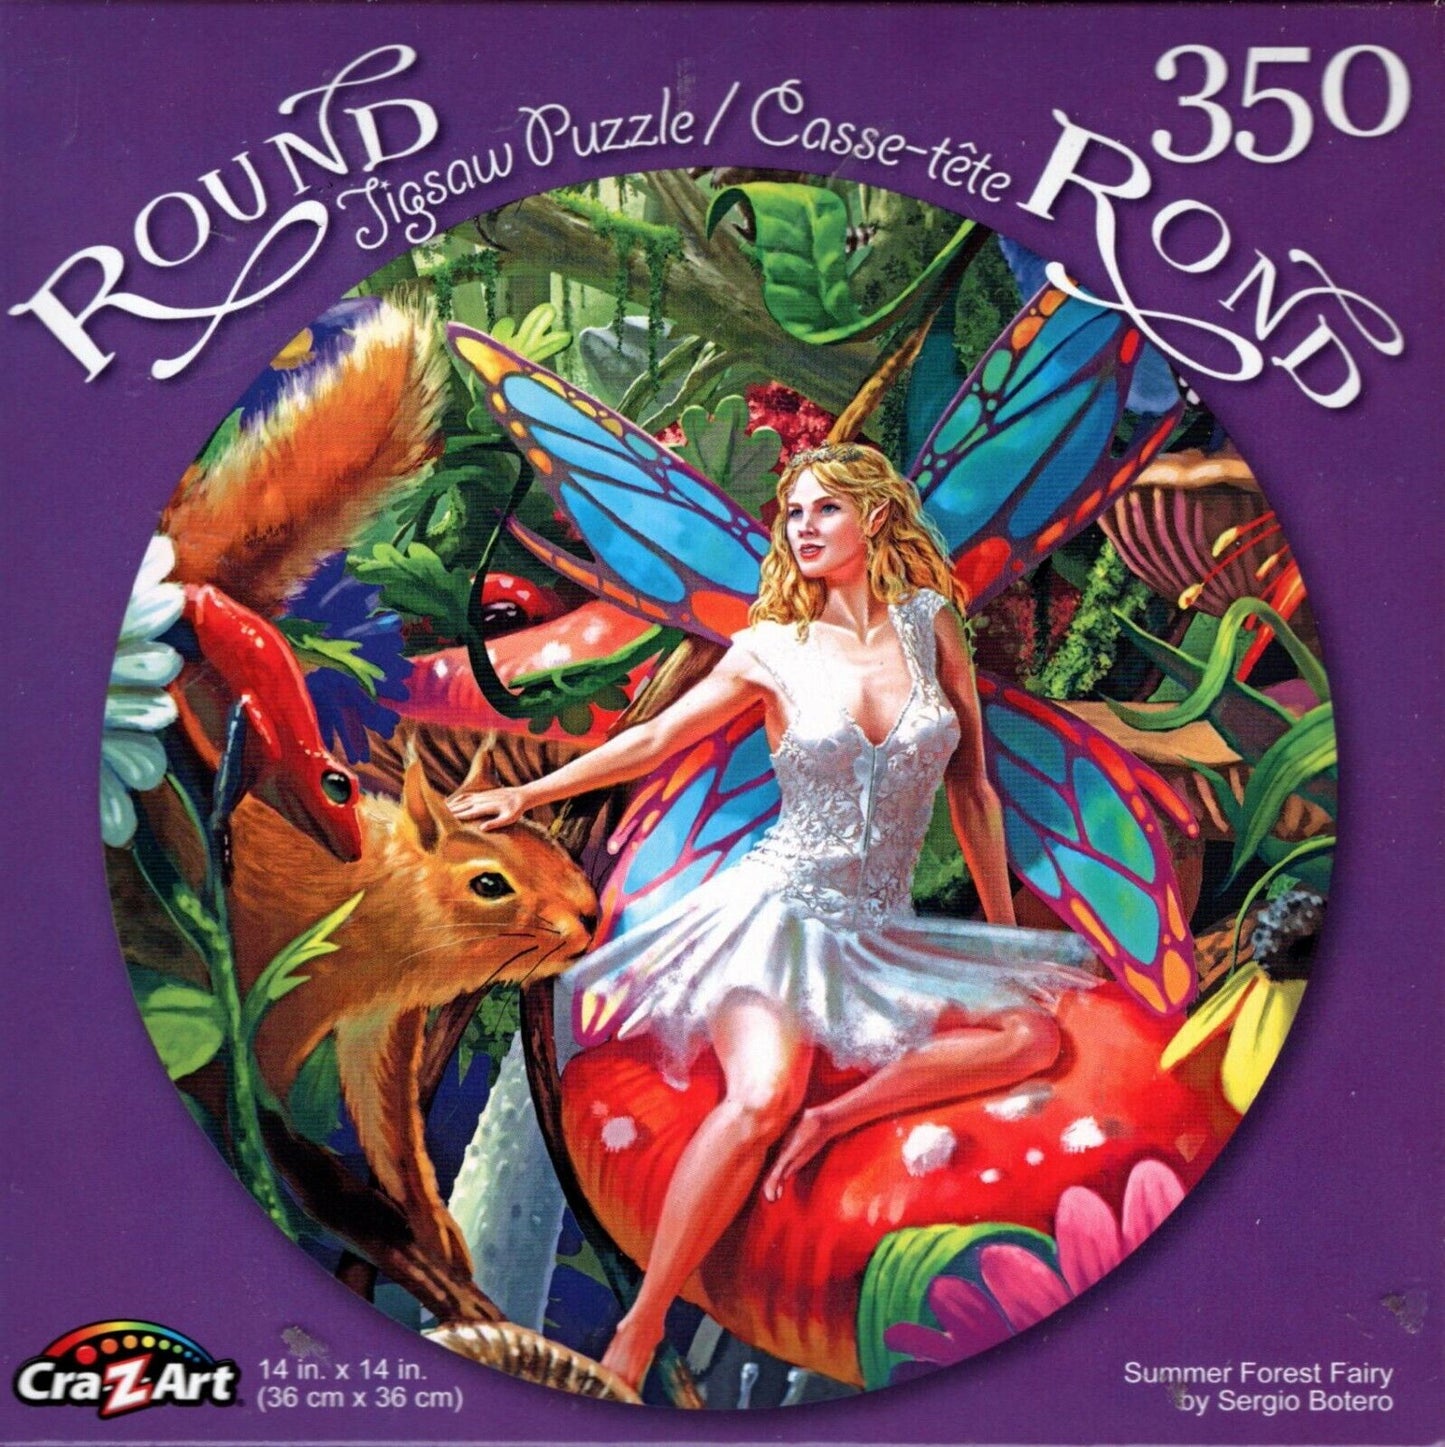 Summer Forest Fairy by Sergio Botero - 350 Piece Round Jigsaw Puzzle